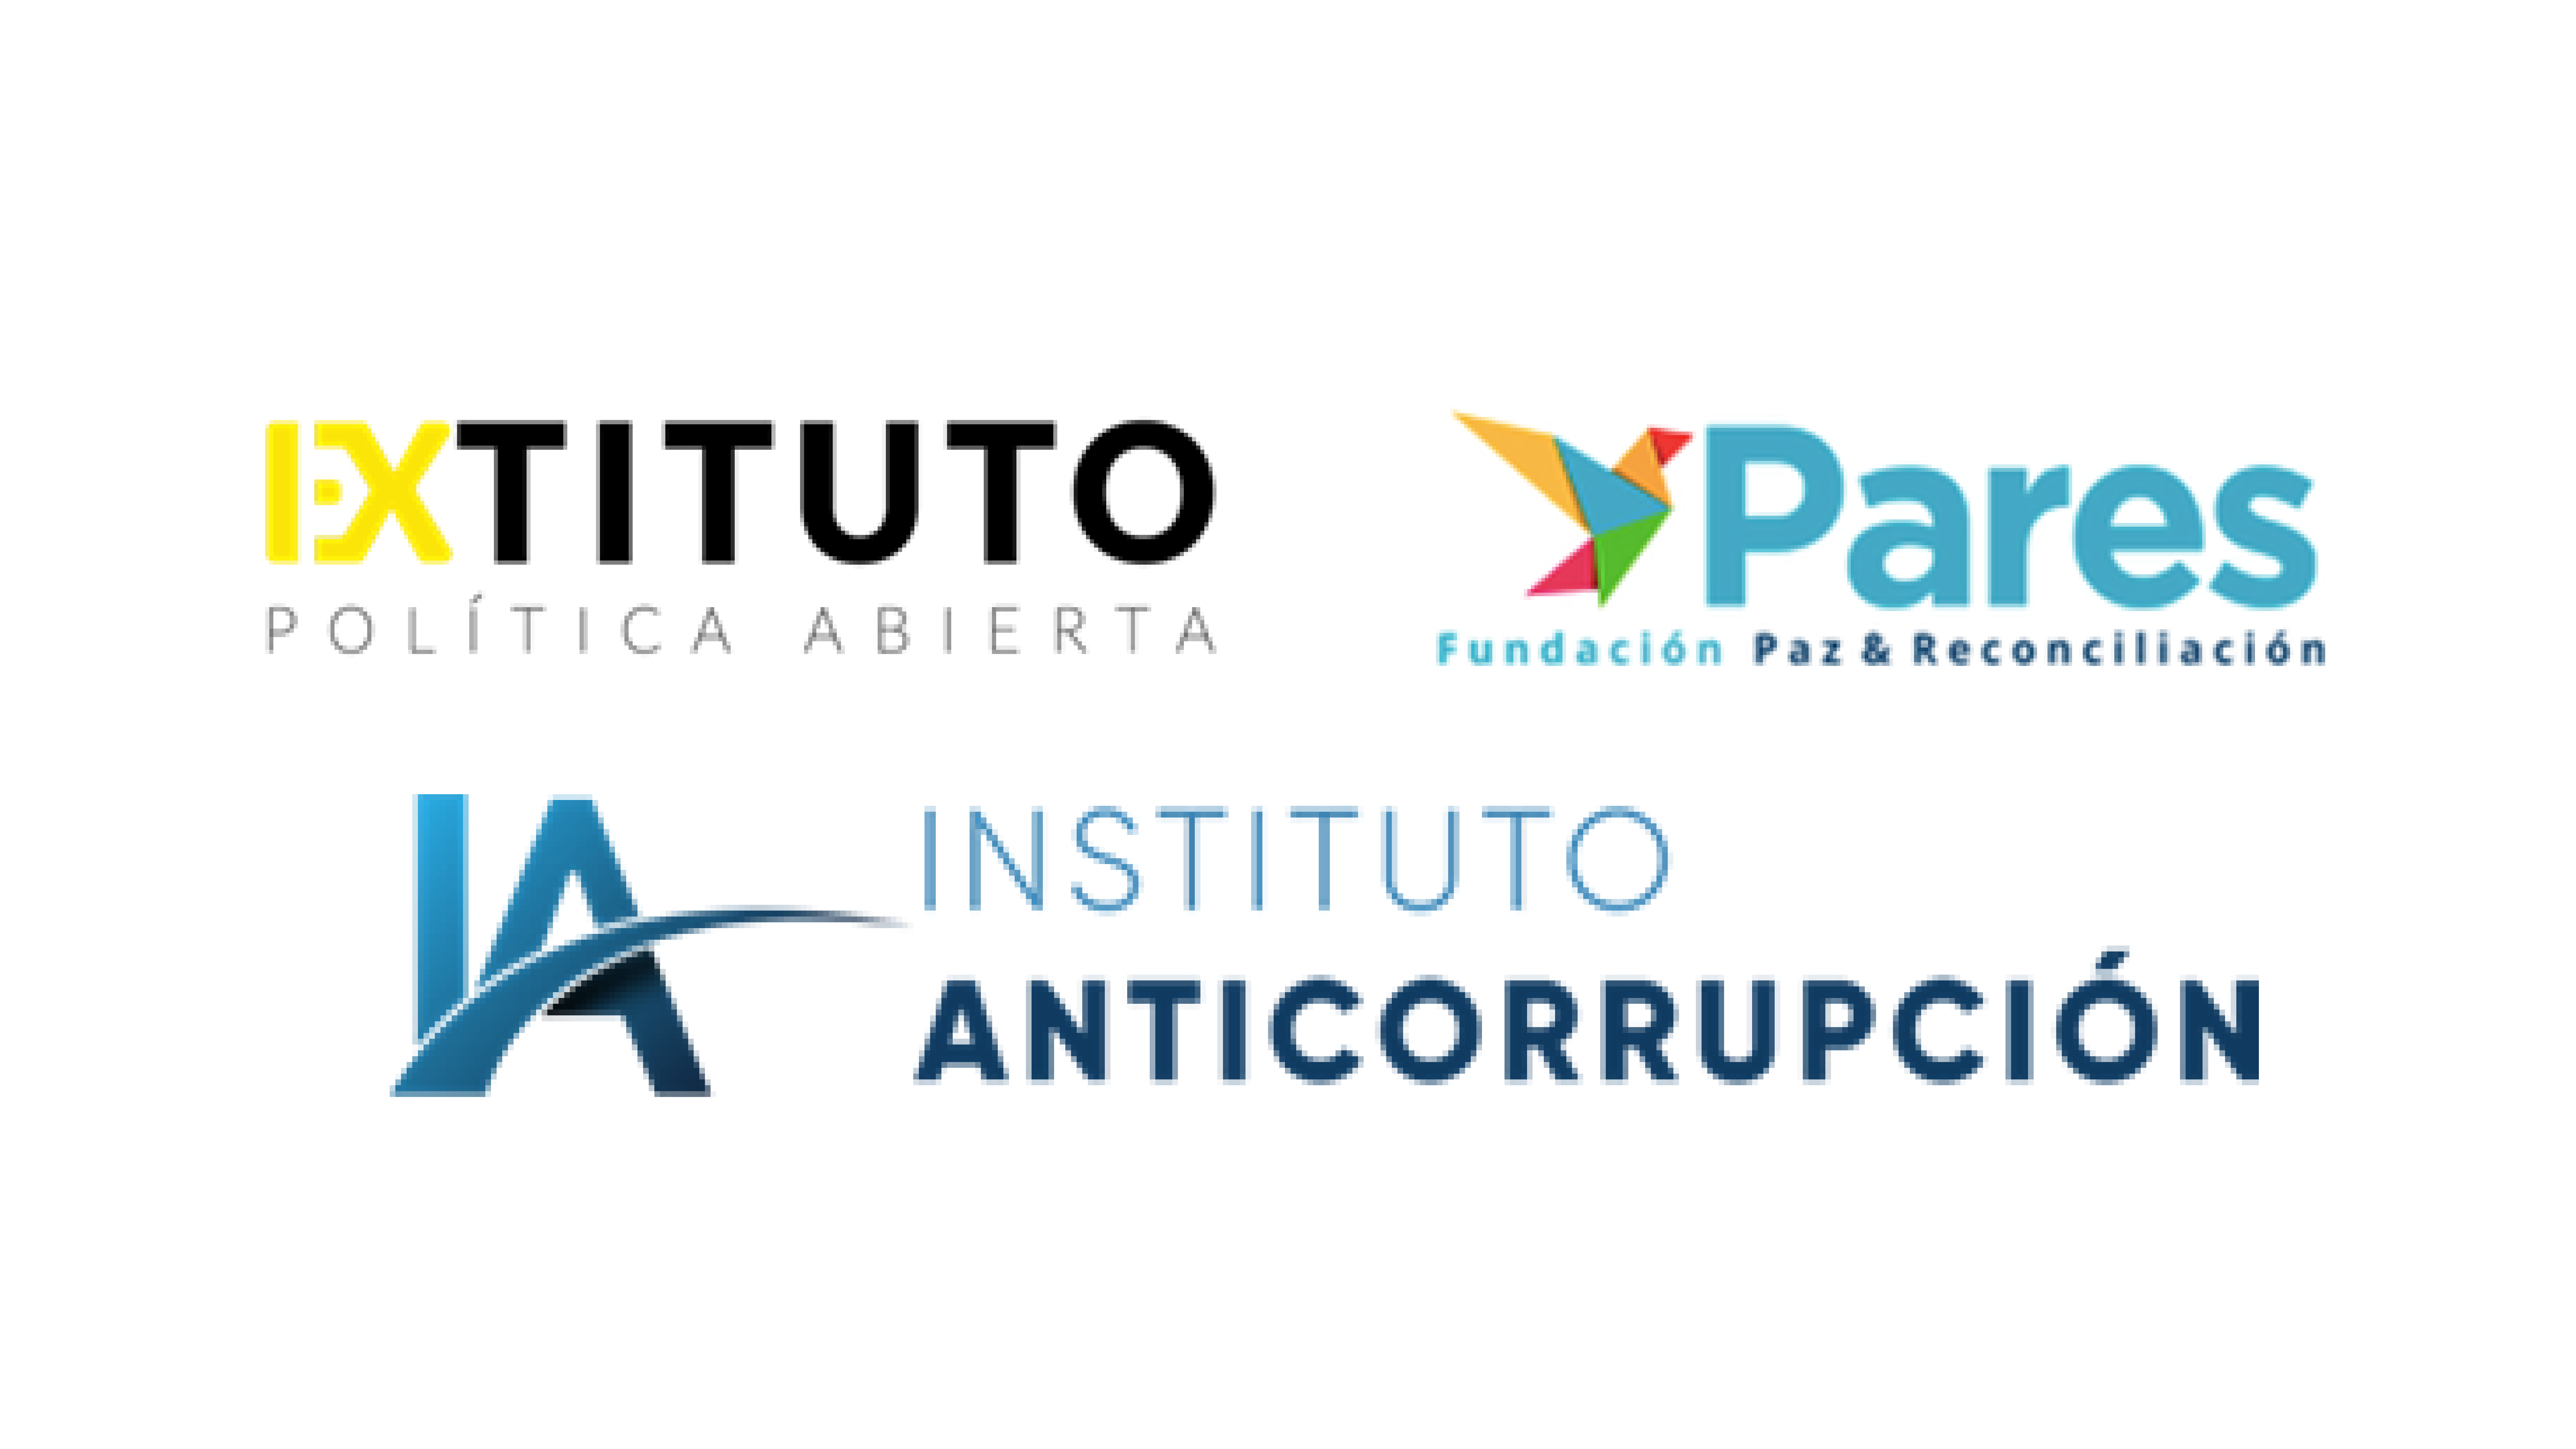 Alliance for Electoral Oversight 2022: formed by the Anti-Corruption Institute, PARES and Extituto